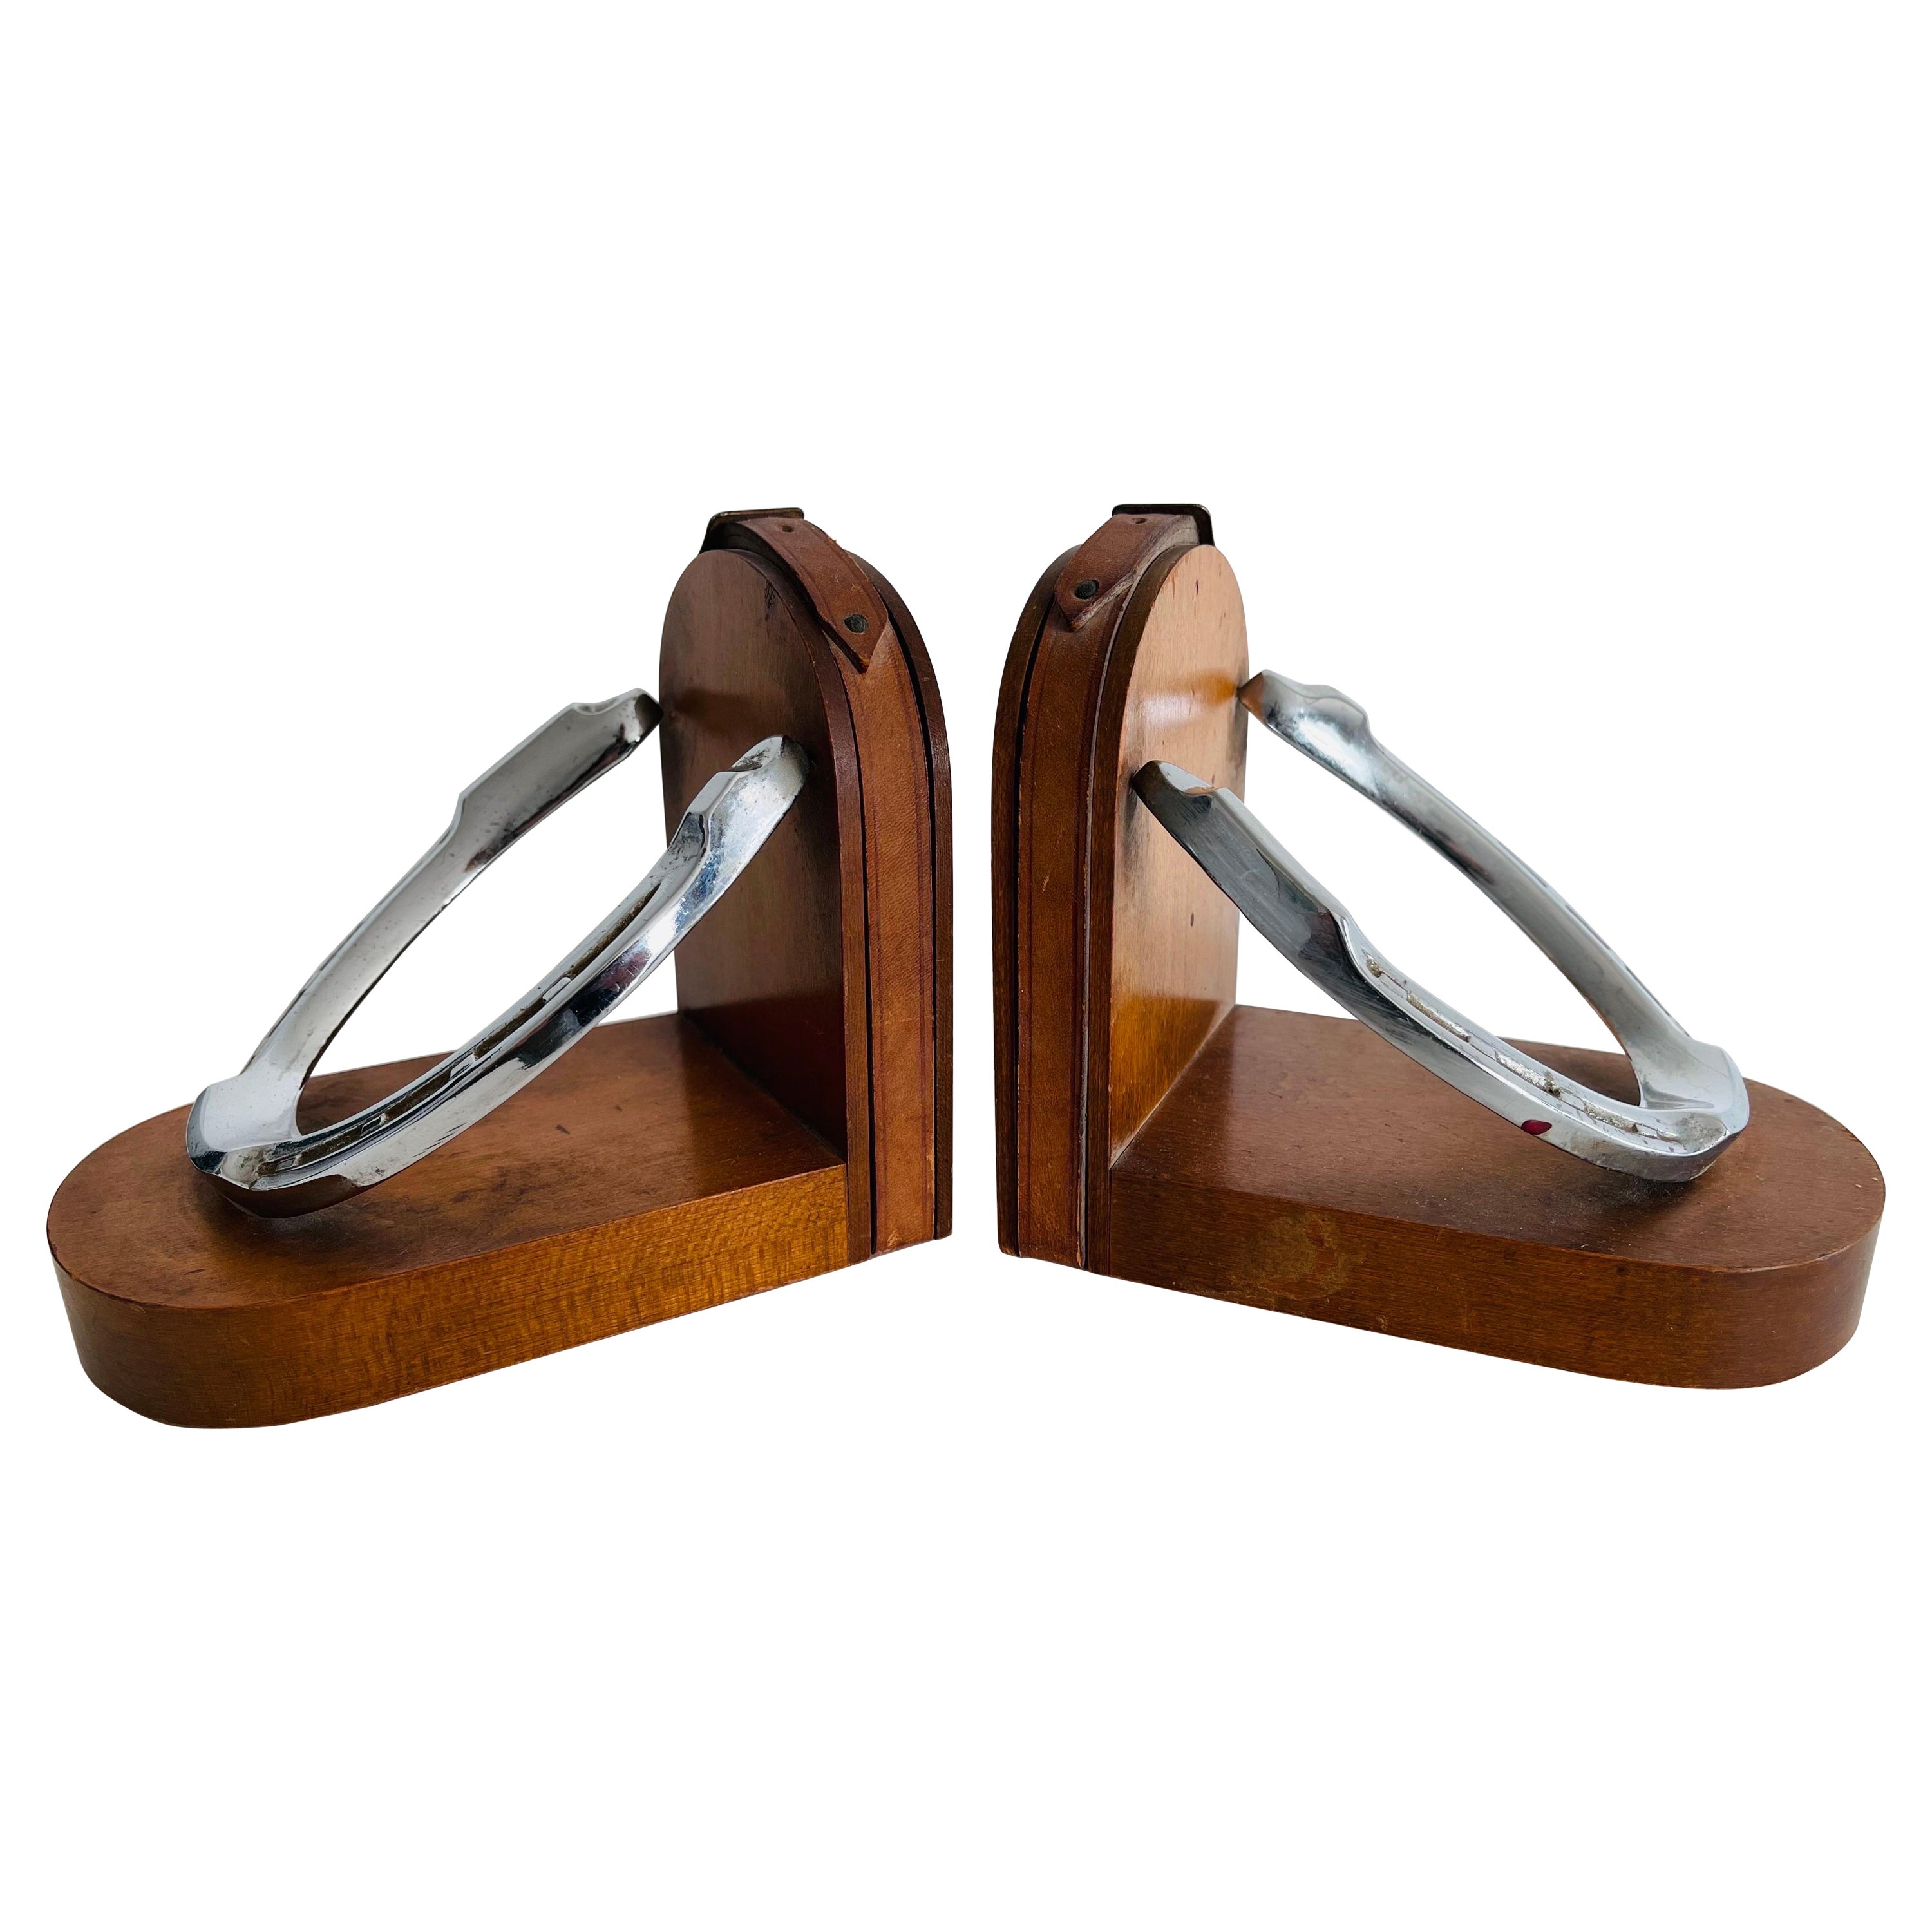 1950s Chrome Horseshoe Bookends, Pair For Sale